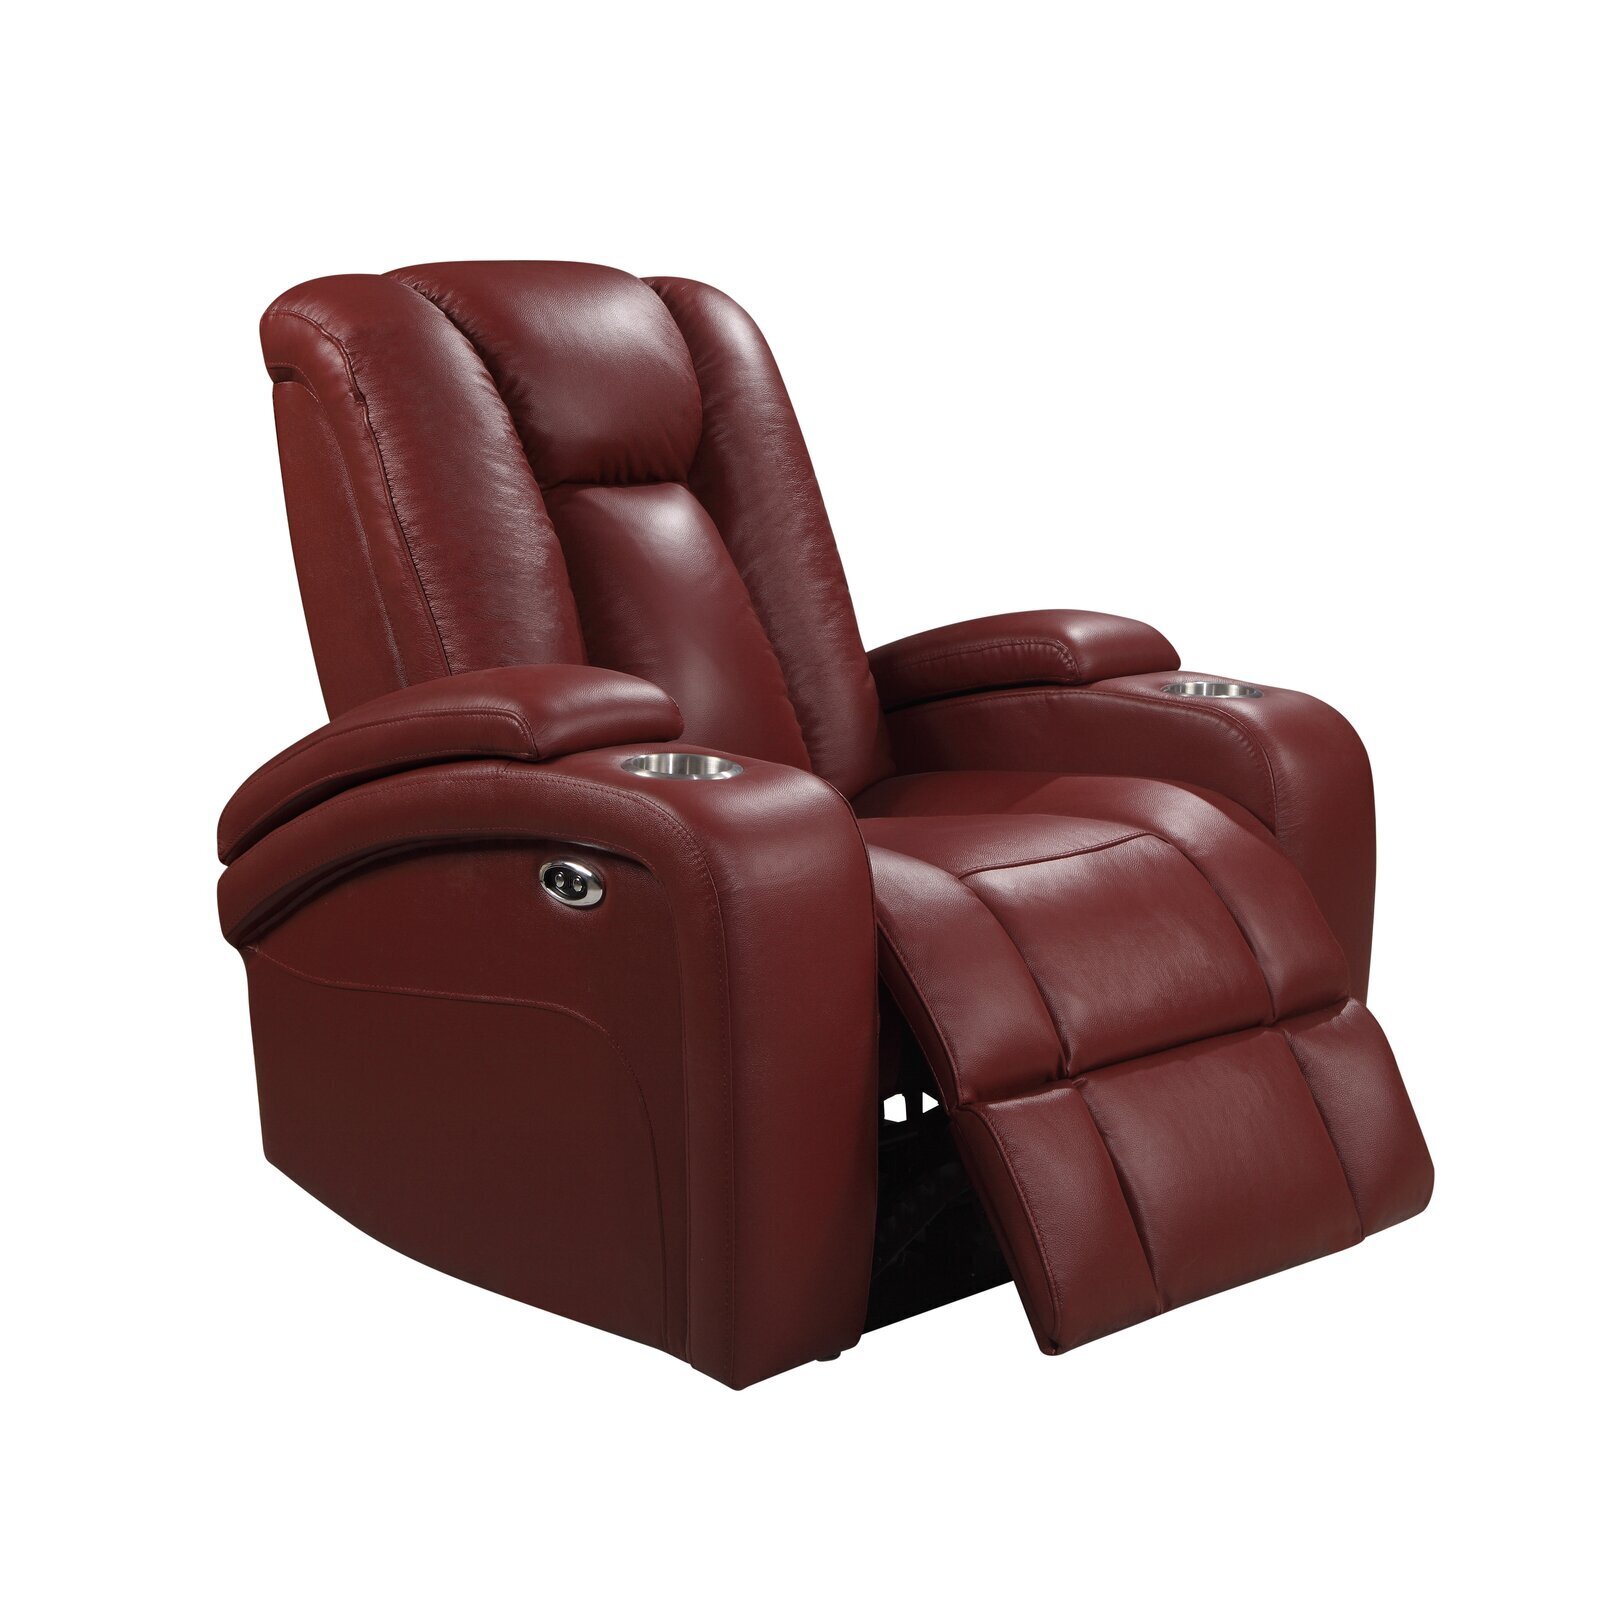 Theater style Red Recliner Chair With Storage